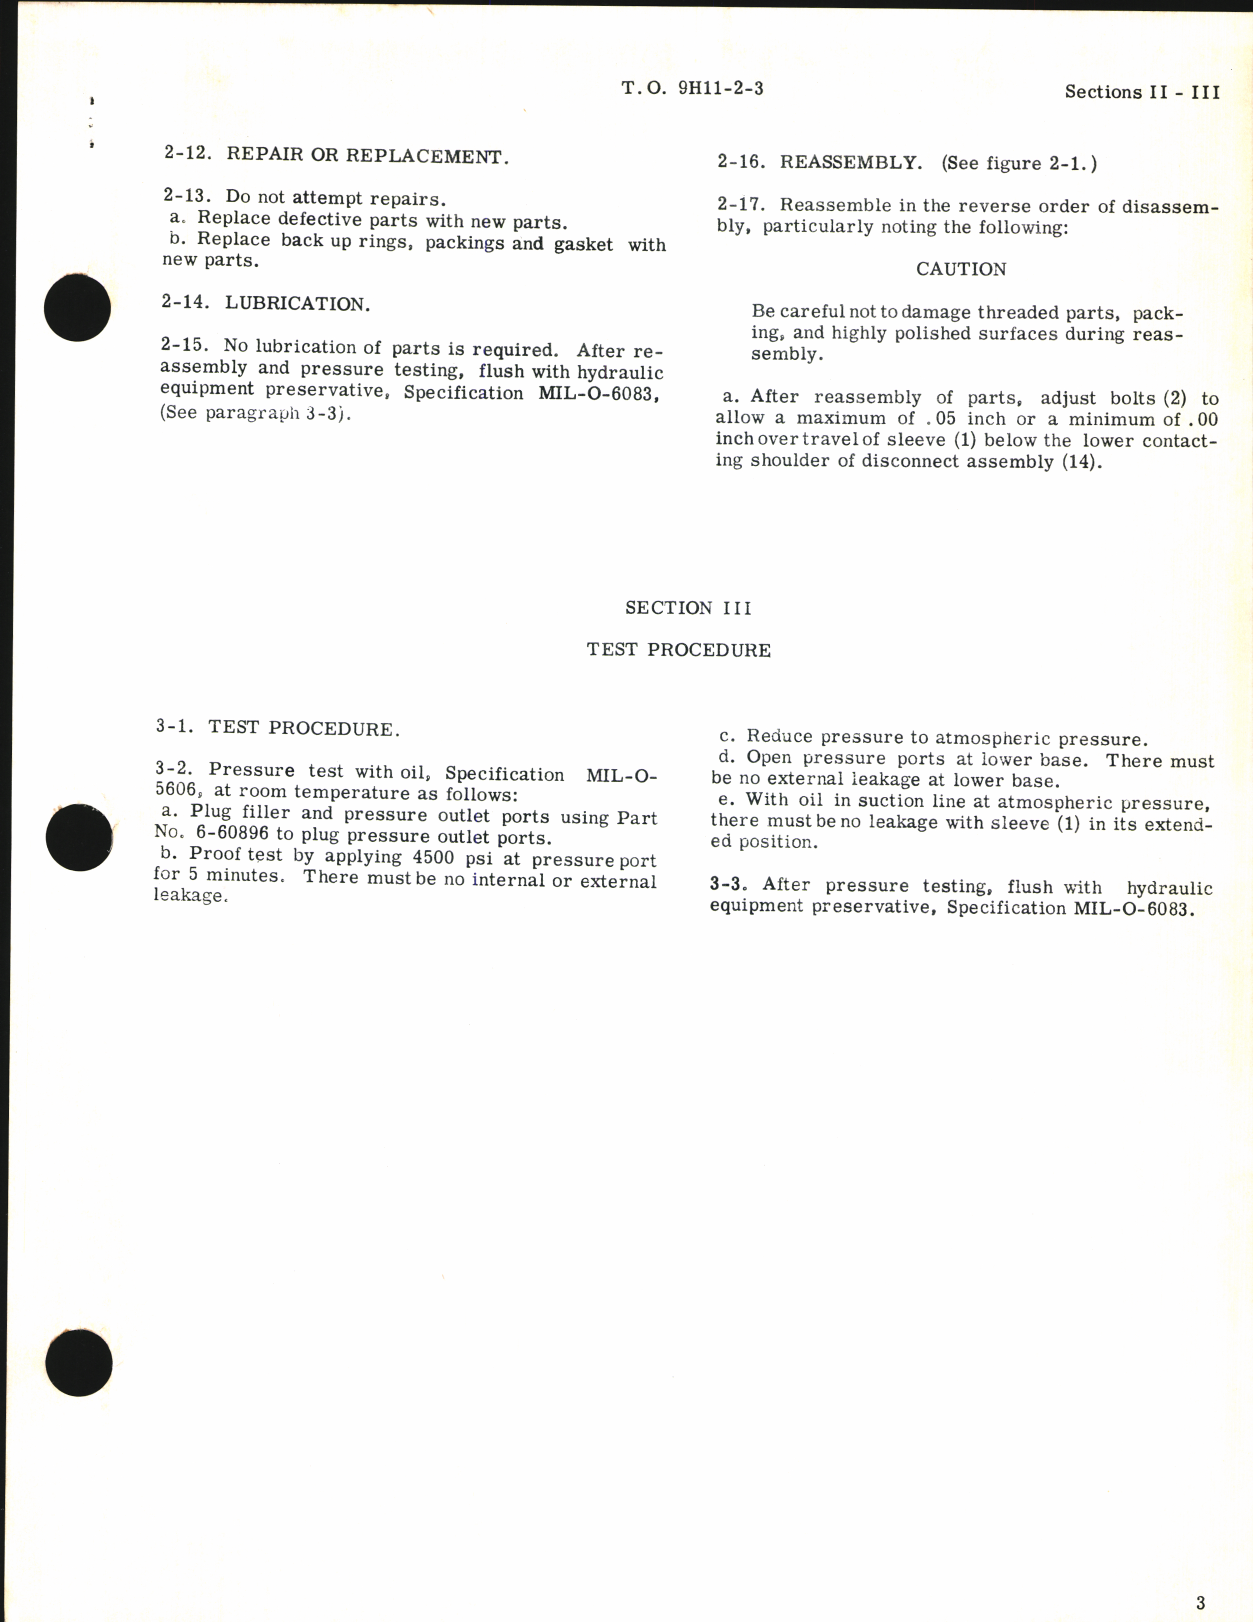 Sample page 7 from AirCorps Library document: Handbook of Overhaul Instructions for Disconnect Assembly Hydraulic Part No. 9-47129